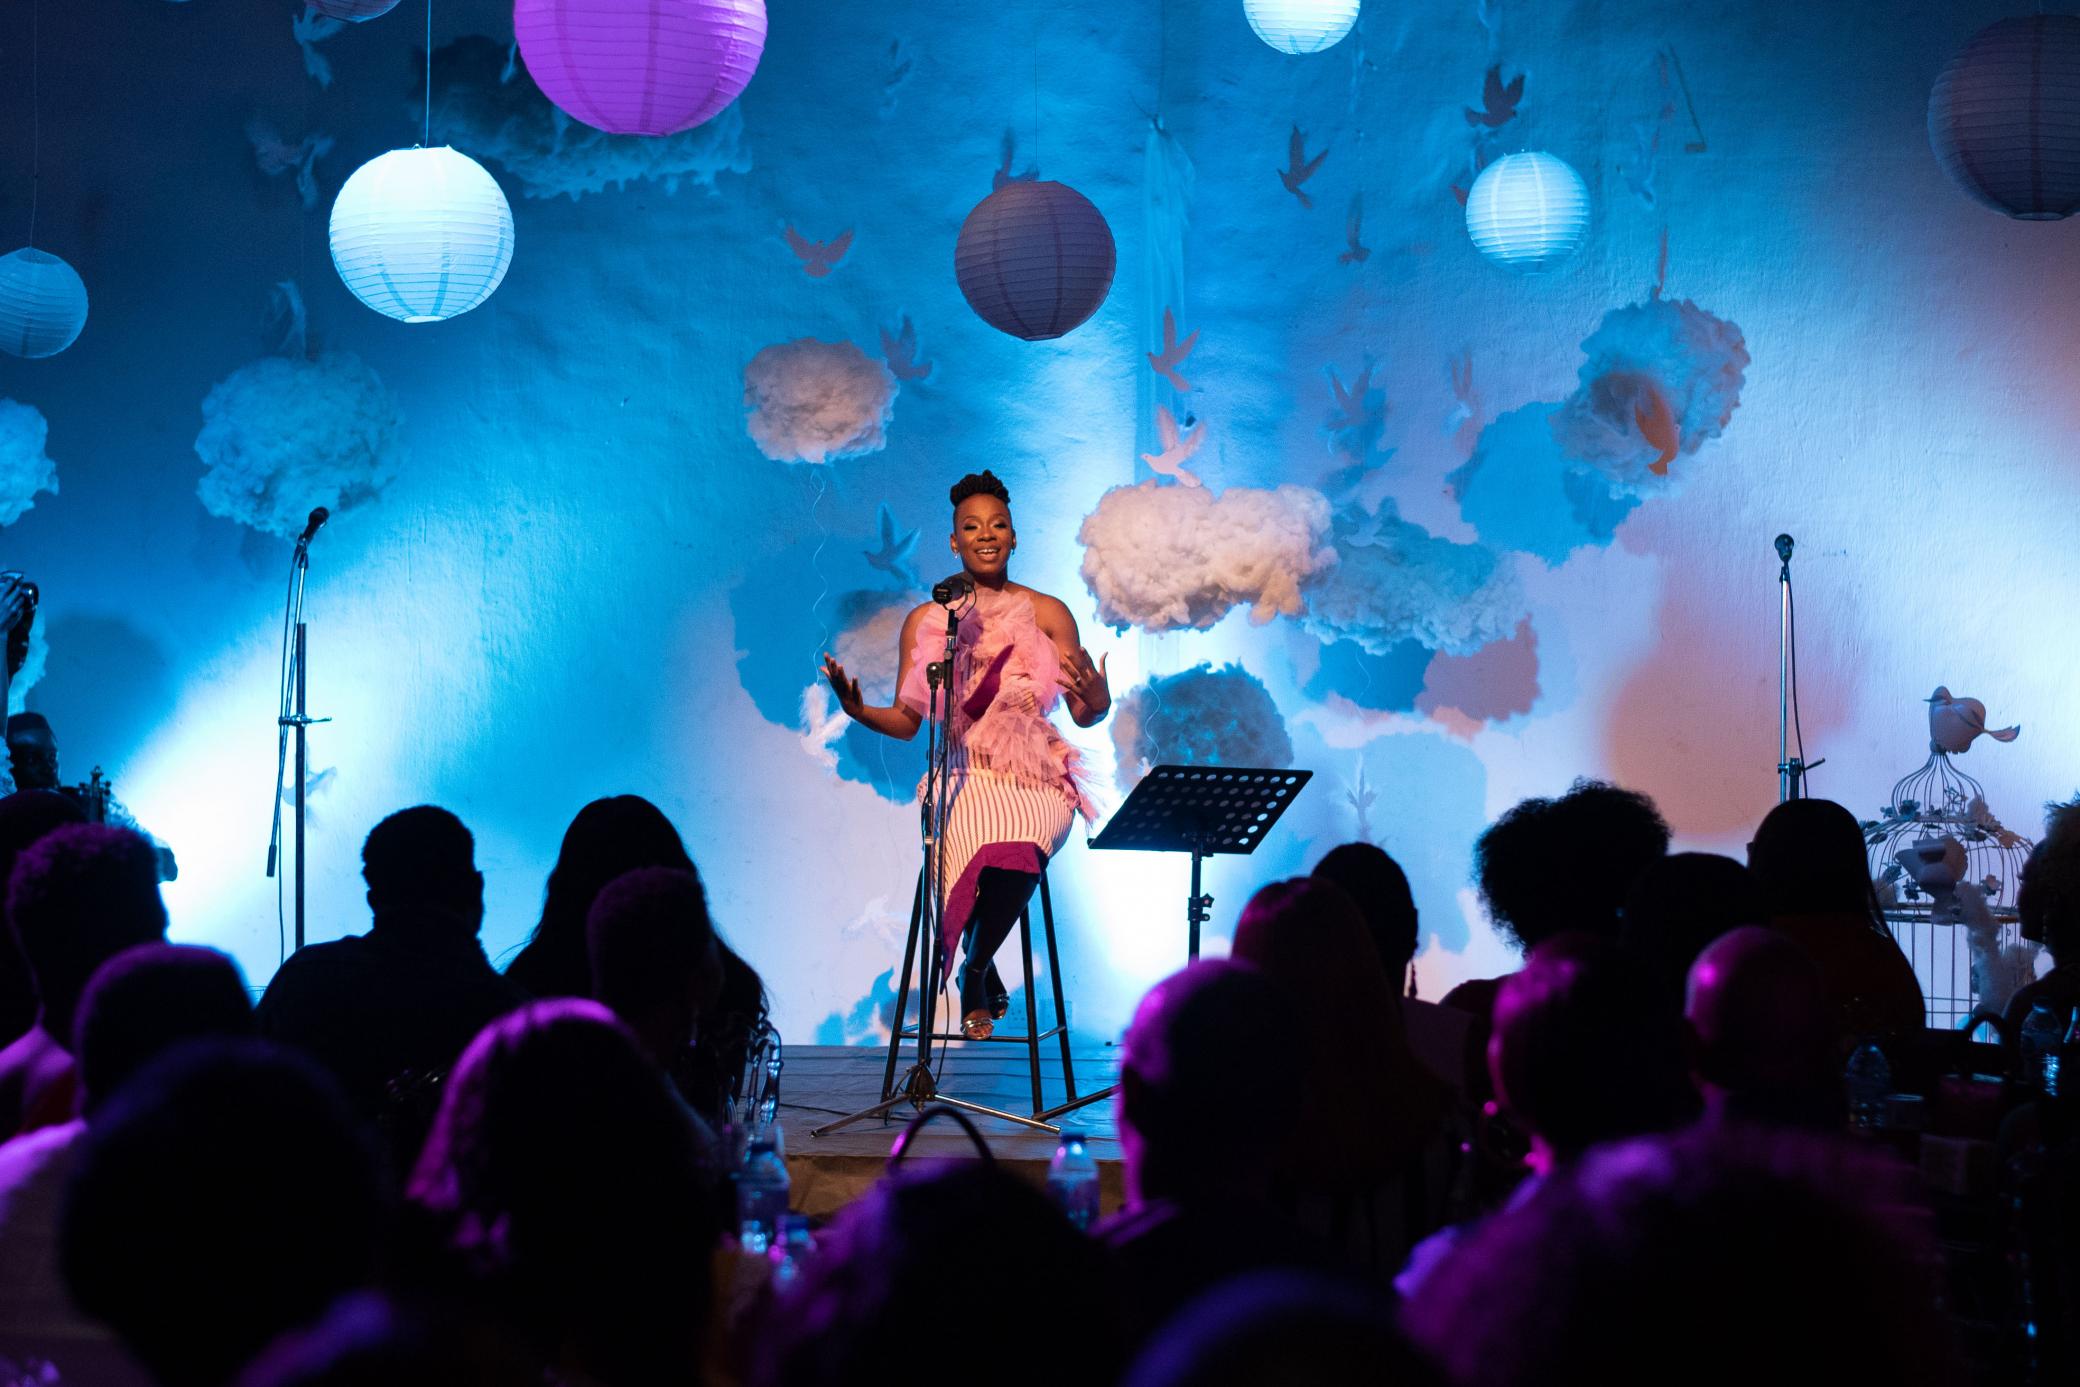 Poet Titilope Sonuga performs on stage lit in blue, in front of a live audience 